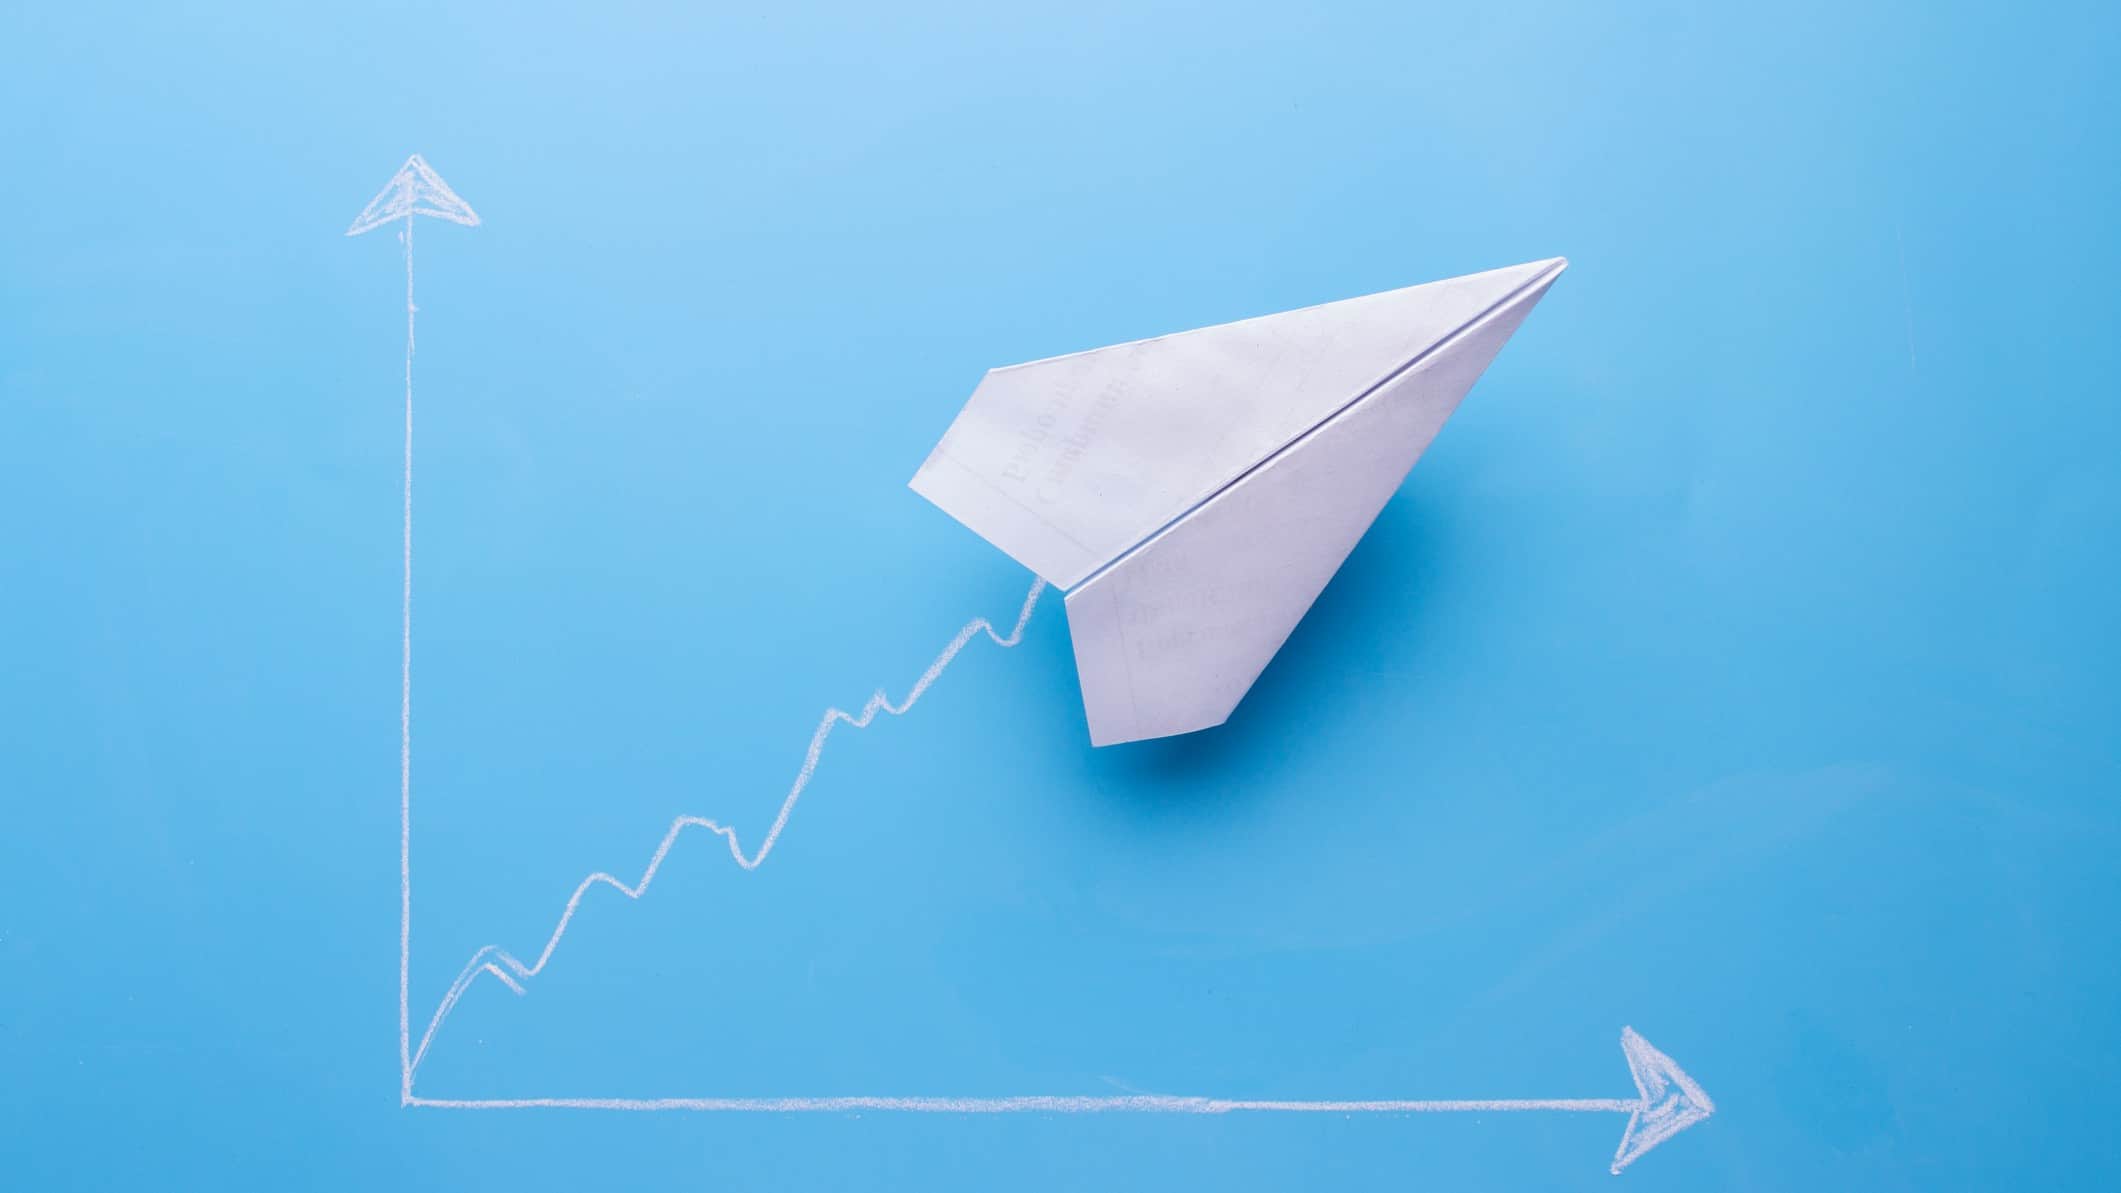 Paper aeroplane rising on a graph, symbolising a rising Corporate Travel Management share price.